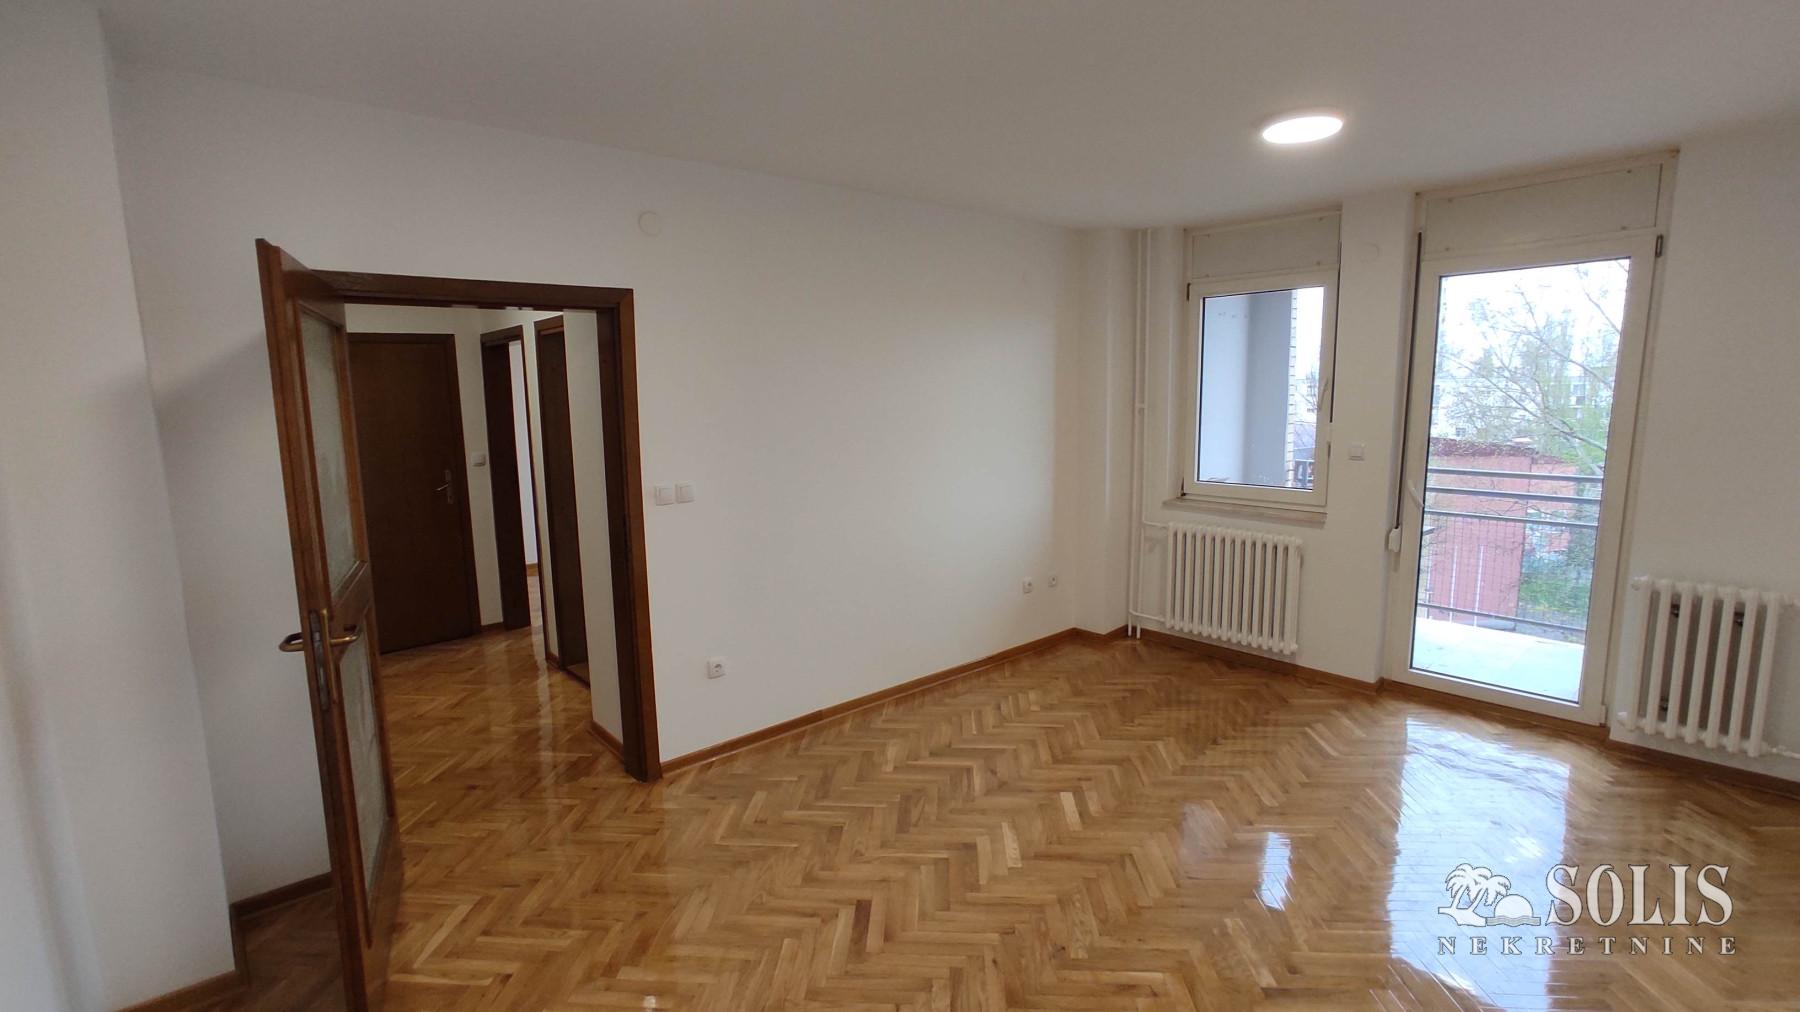 Apartment, Two-room apartment (one bedroom)<br>51 m<sup>2</sup>, Detelinara